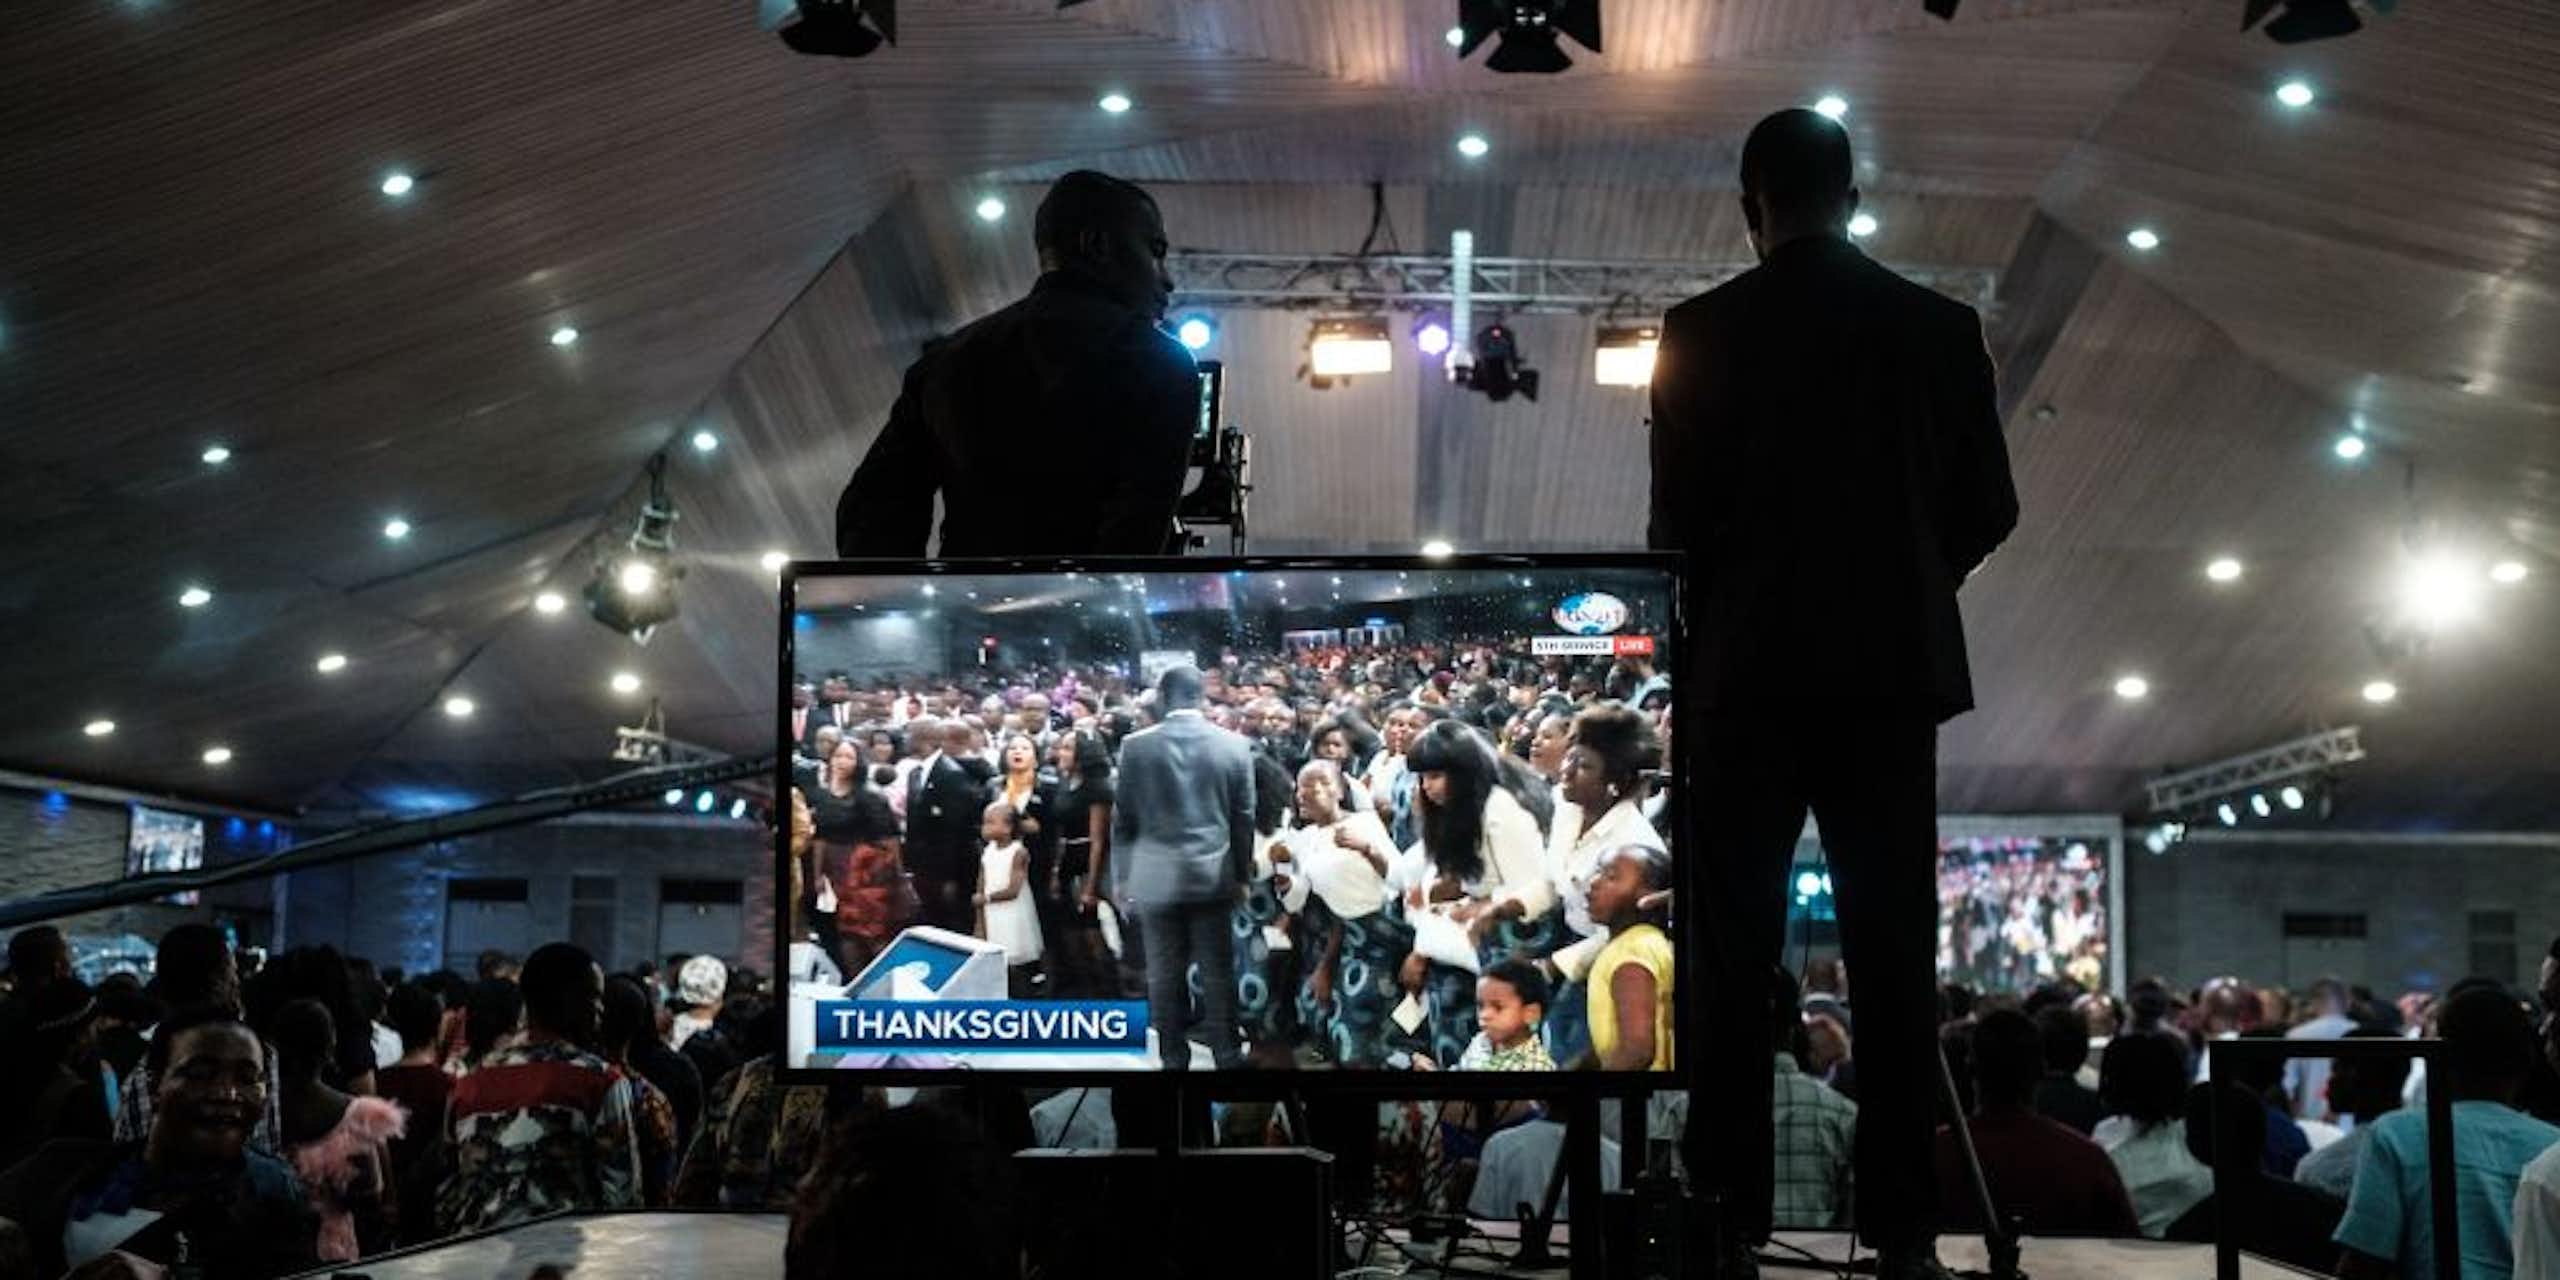 Two men stand at a giant TV screen. They're on a platform, one behind a camera, filming scenes from a gathering of many people in what appears to be a giant tent with lights. On the screen a man in a grey suit moves along the front row of people in worship.